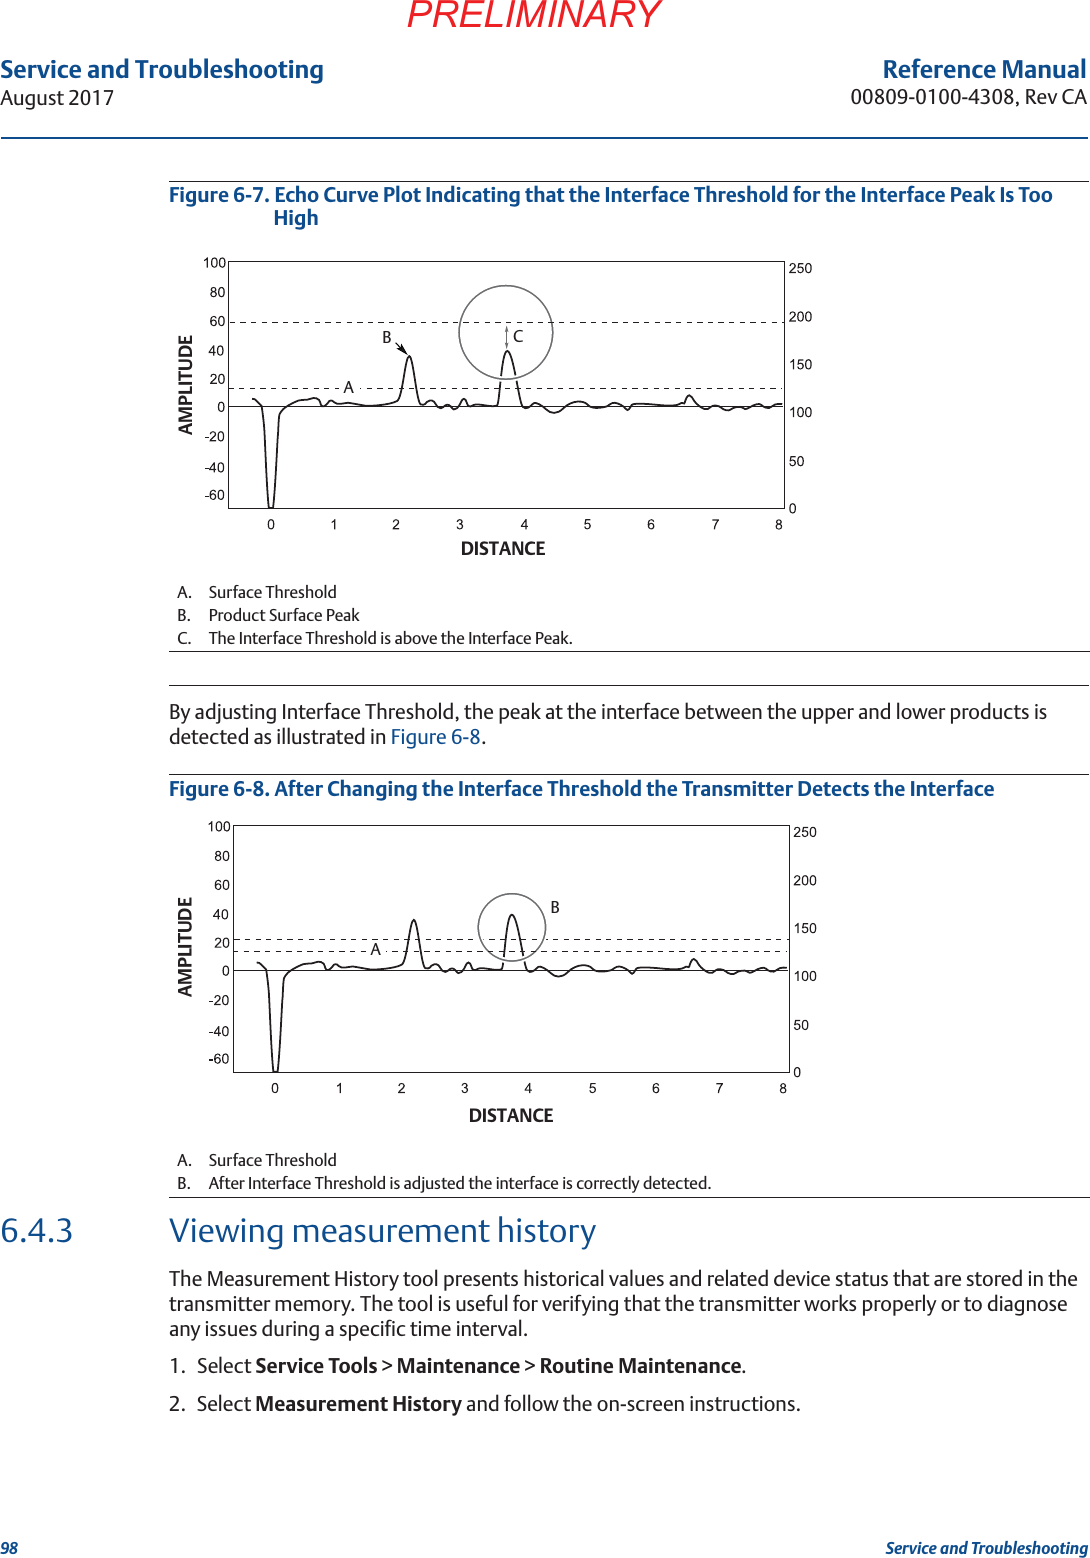 98Service and TroubleshootingAugust 2017Service and TroubleshootingPRELIMINARYReference Manual00809-0100-4308, Rev CAFigure 6-7. Echo Curve Plot Indicating that the Interface Threshold for the Interface Peak Is Too HighBy adjusting Interface Threshold, the peak at the interface between the upper and lower products is detected as illustrated in Figure 6-8.Figure 6-8. After Changing the Interface Threshold the Transmitter Detects the Interface6.4.3 Viewing measurement historyThe Measurement History tool presents historical values and related device status that are stored in the transmitter memory. The tool is useful for verifying that the transmitter works properly or to diagnose any issues during a specific time interval.1. Select Service Tools &gt; Maintenance &gt; Routine Maintenance.2. Select Measurement History and follow the on-screen instructions.A. Surface ThresholdB. Product Surface PeakC. The Interface Threshold is above the Interface Peak.A. Surface ThresholdB. After Interface Threshold is adjusted the interface is correctly detected.CAMPLITUDEDISTANCEBABAMPLITUDEDISTANCEA